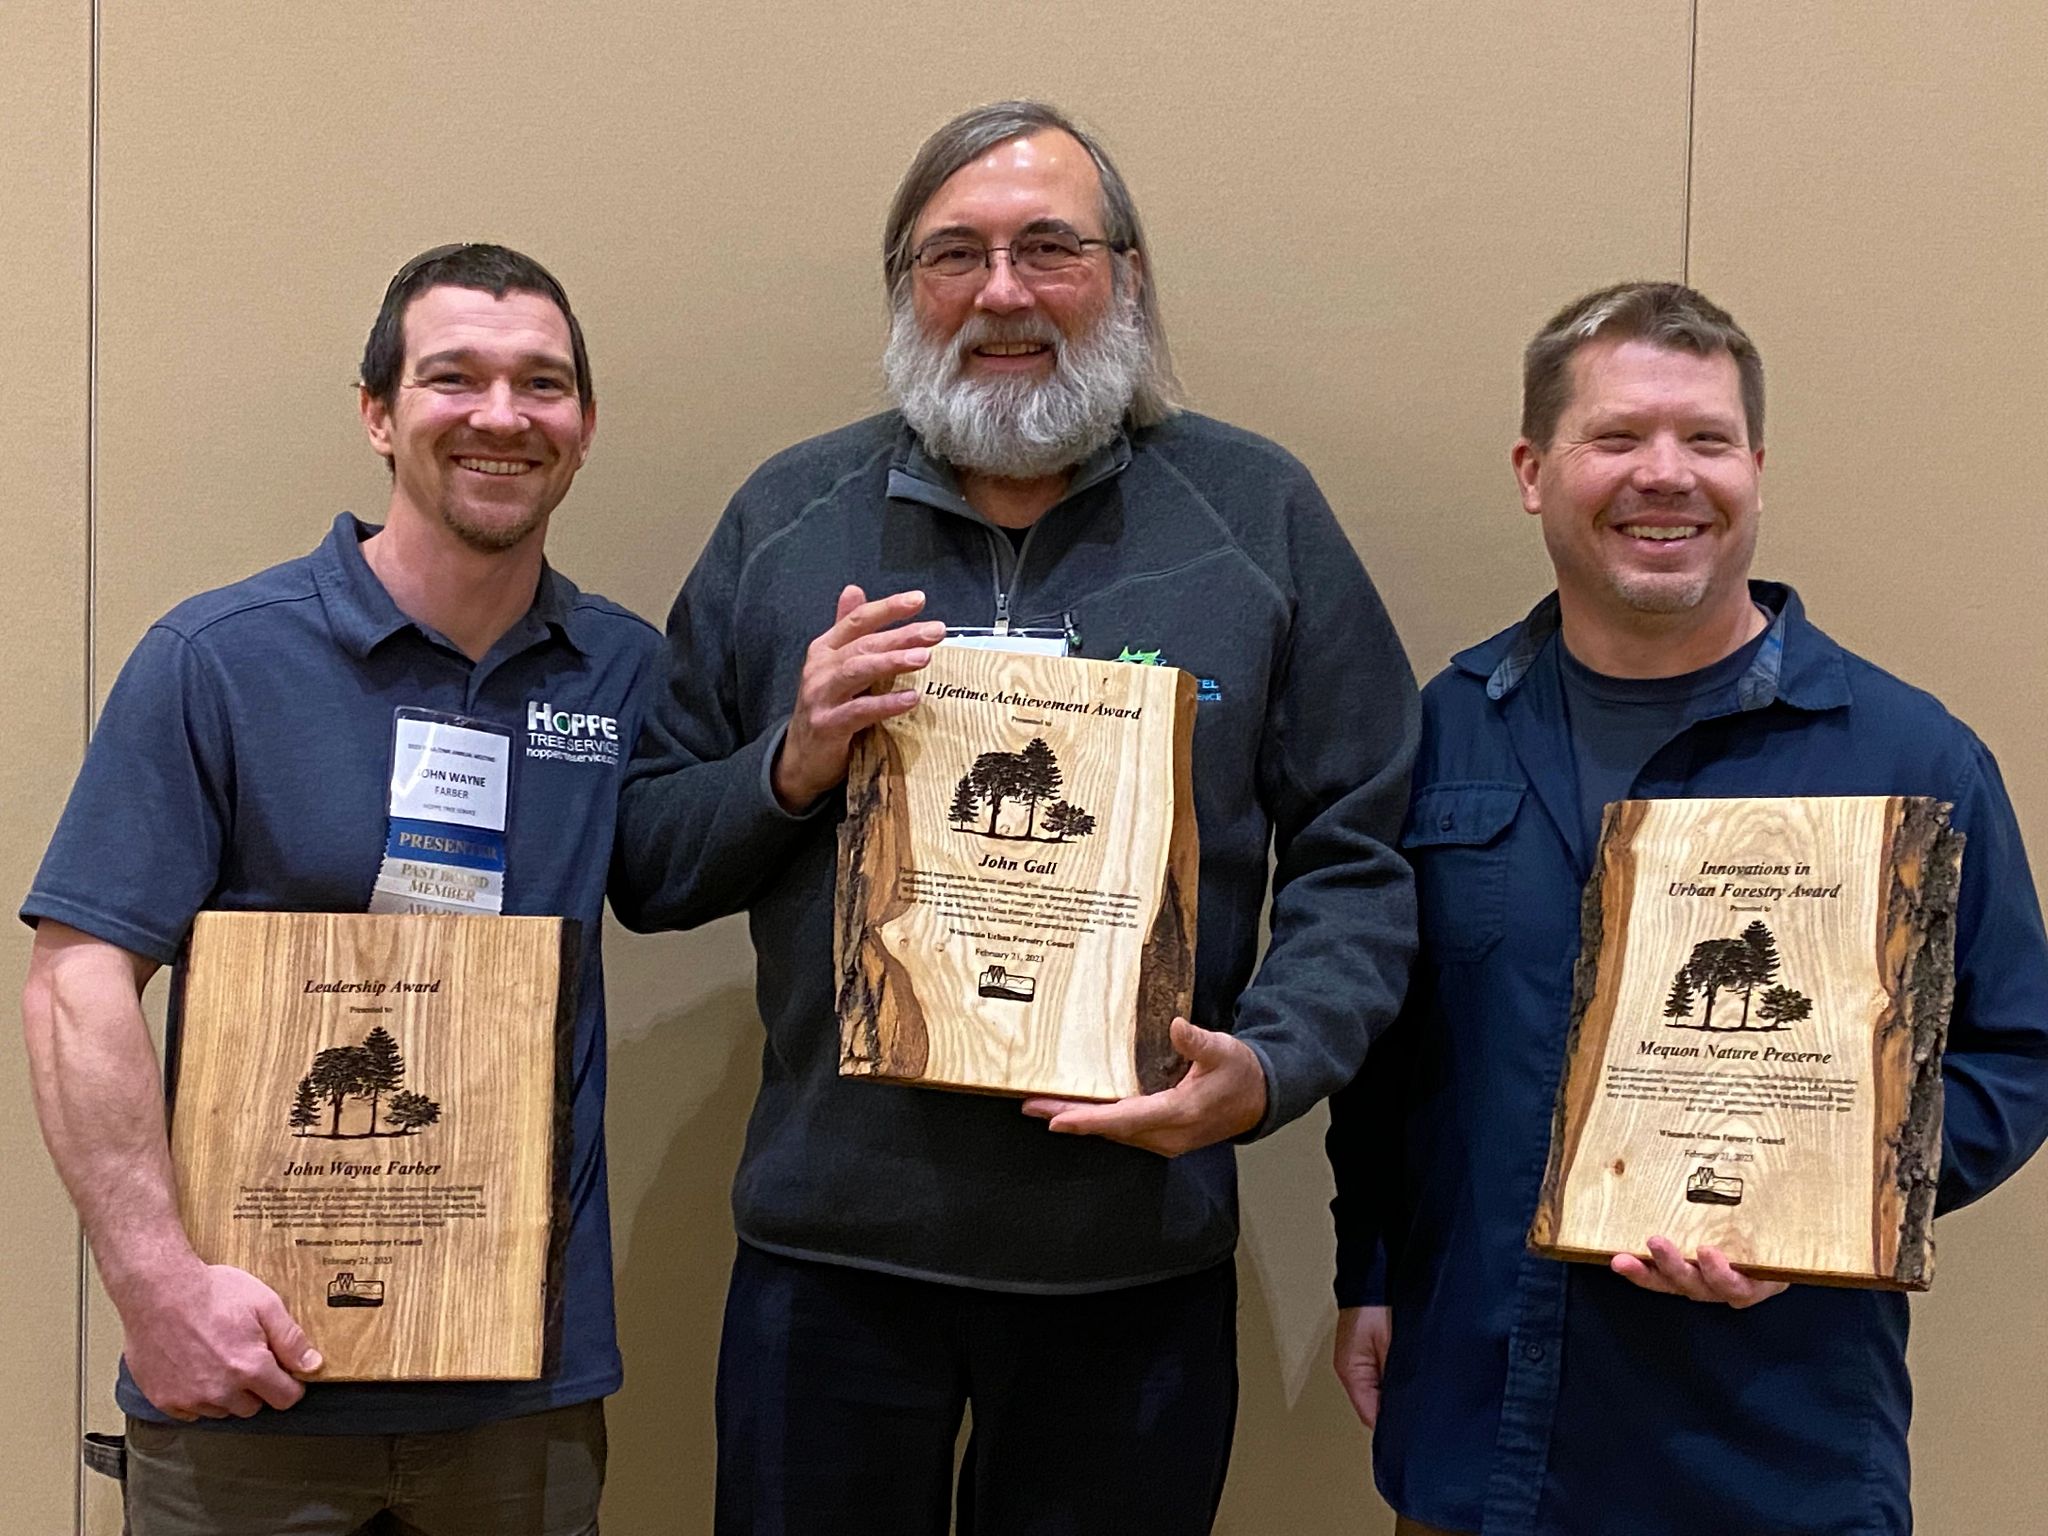 The 2023 Urban Forestry Award winners. From left to right: John Wayne Farber, Leadership Award; John Gall, Lifetime Achievement Award; Cory Gritzmacher, receiving the Innovation Award on behalf of the Mequon Nature Preserve.